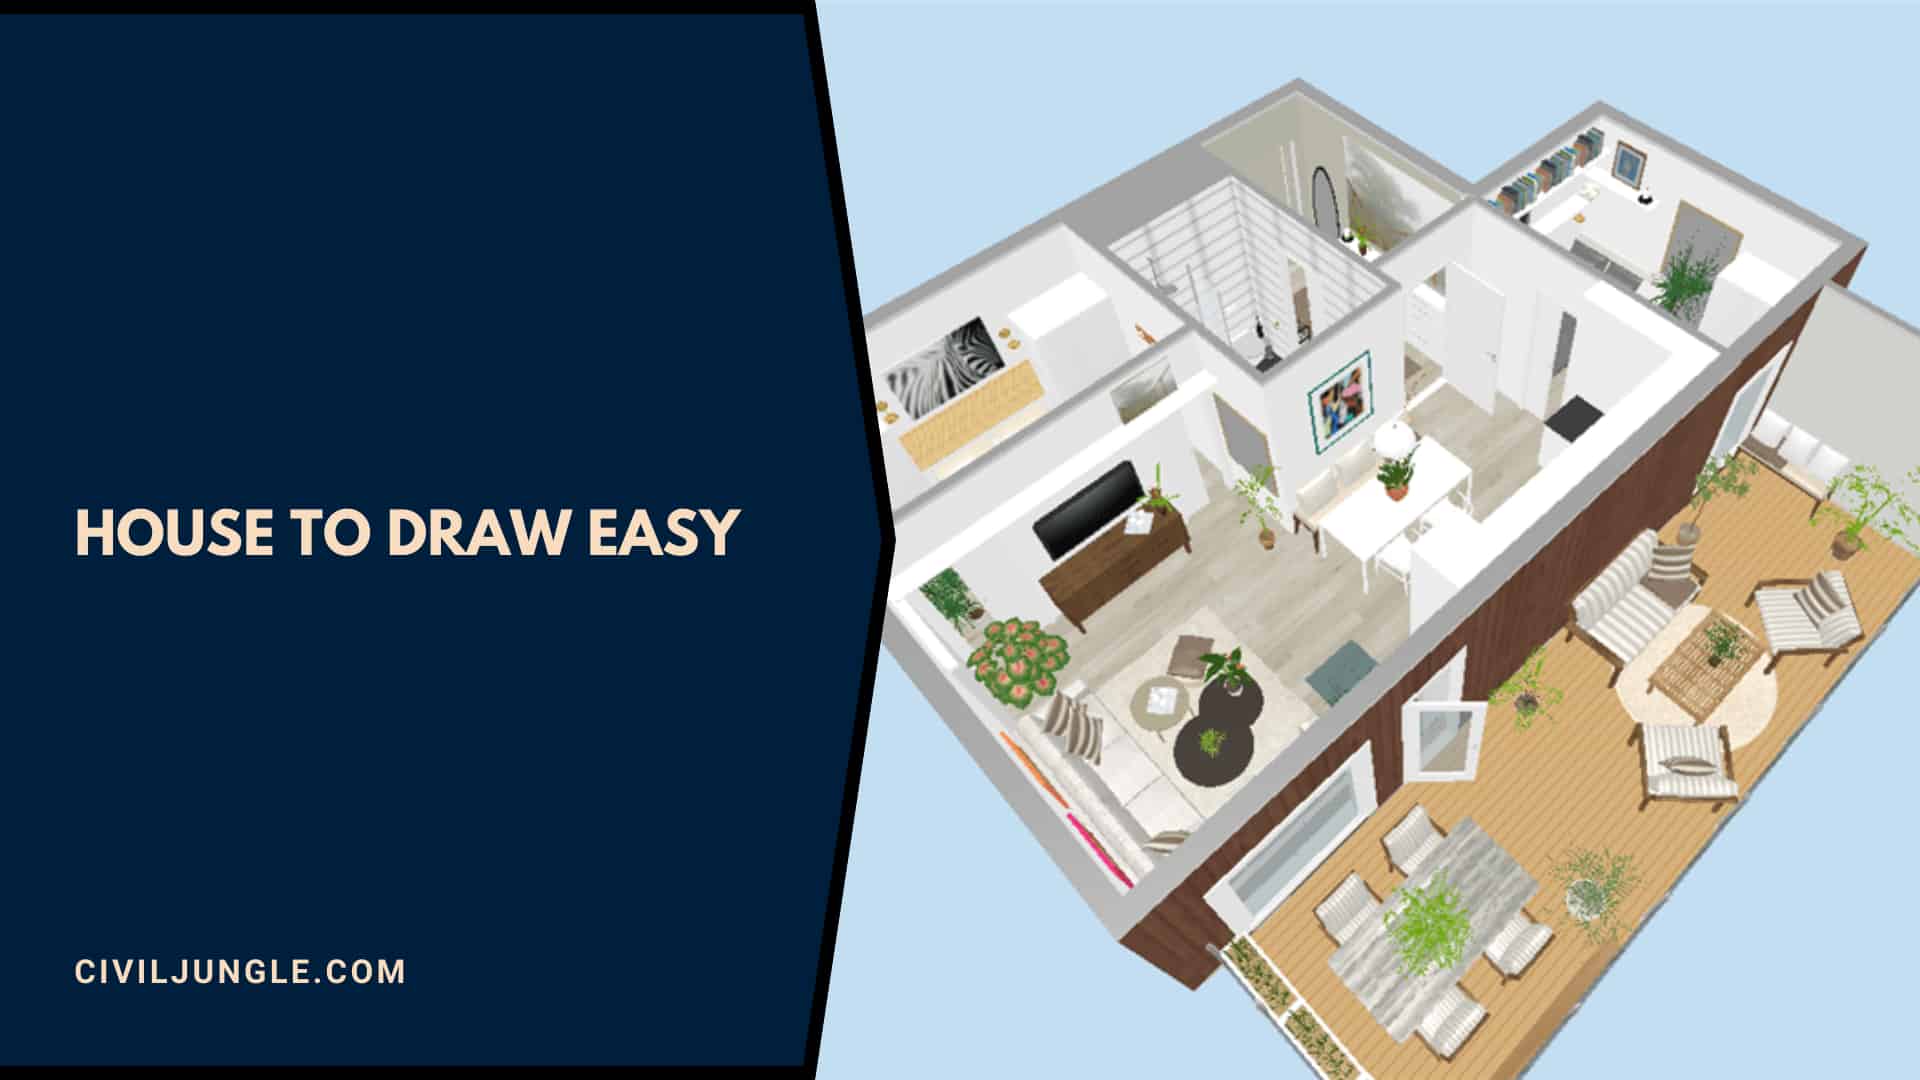 House to Draw Easy